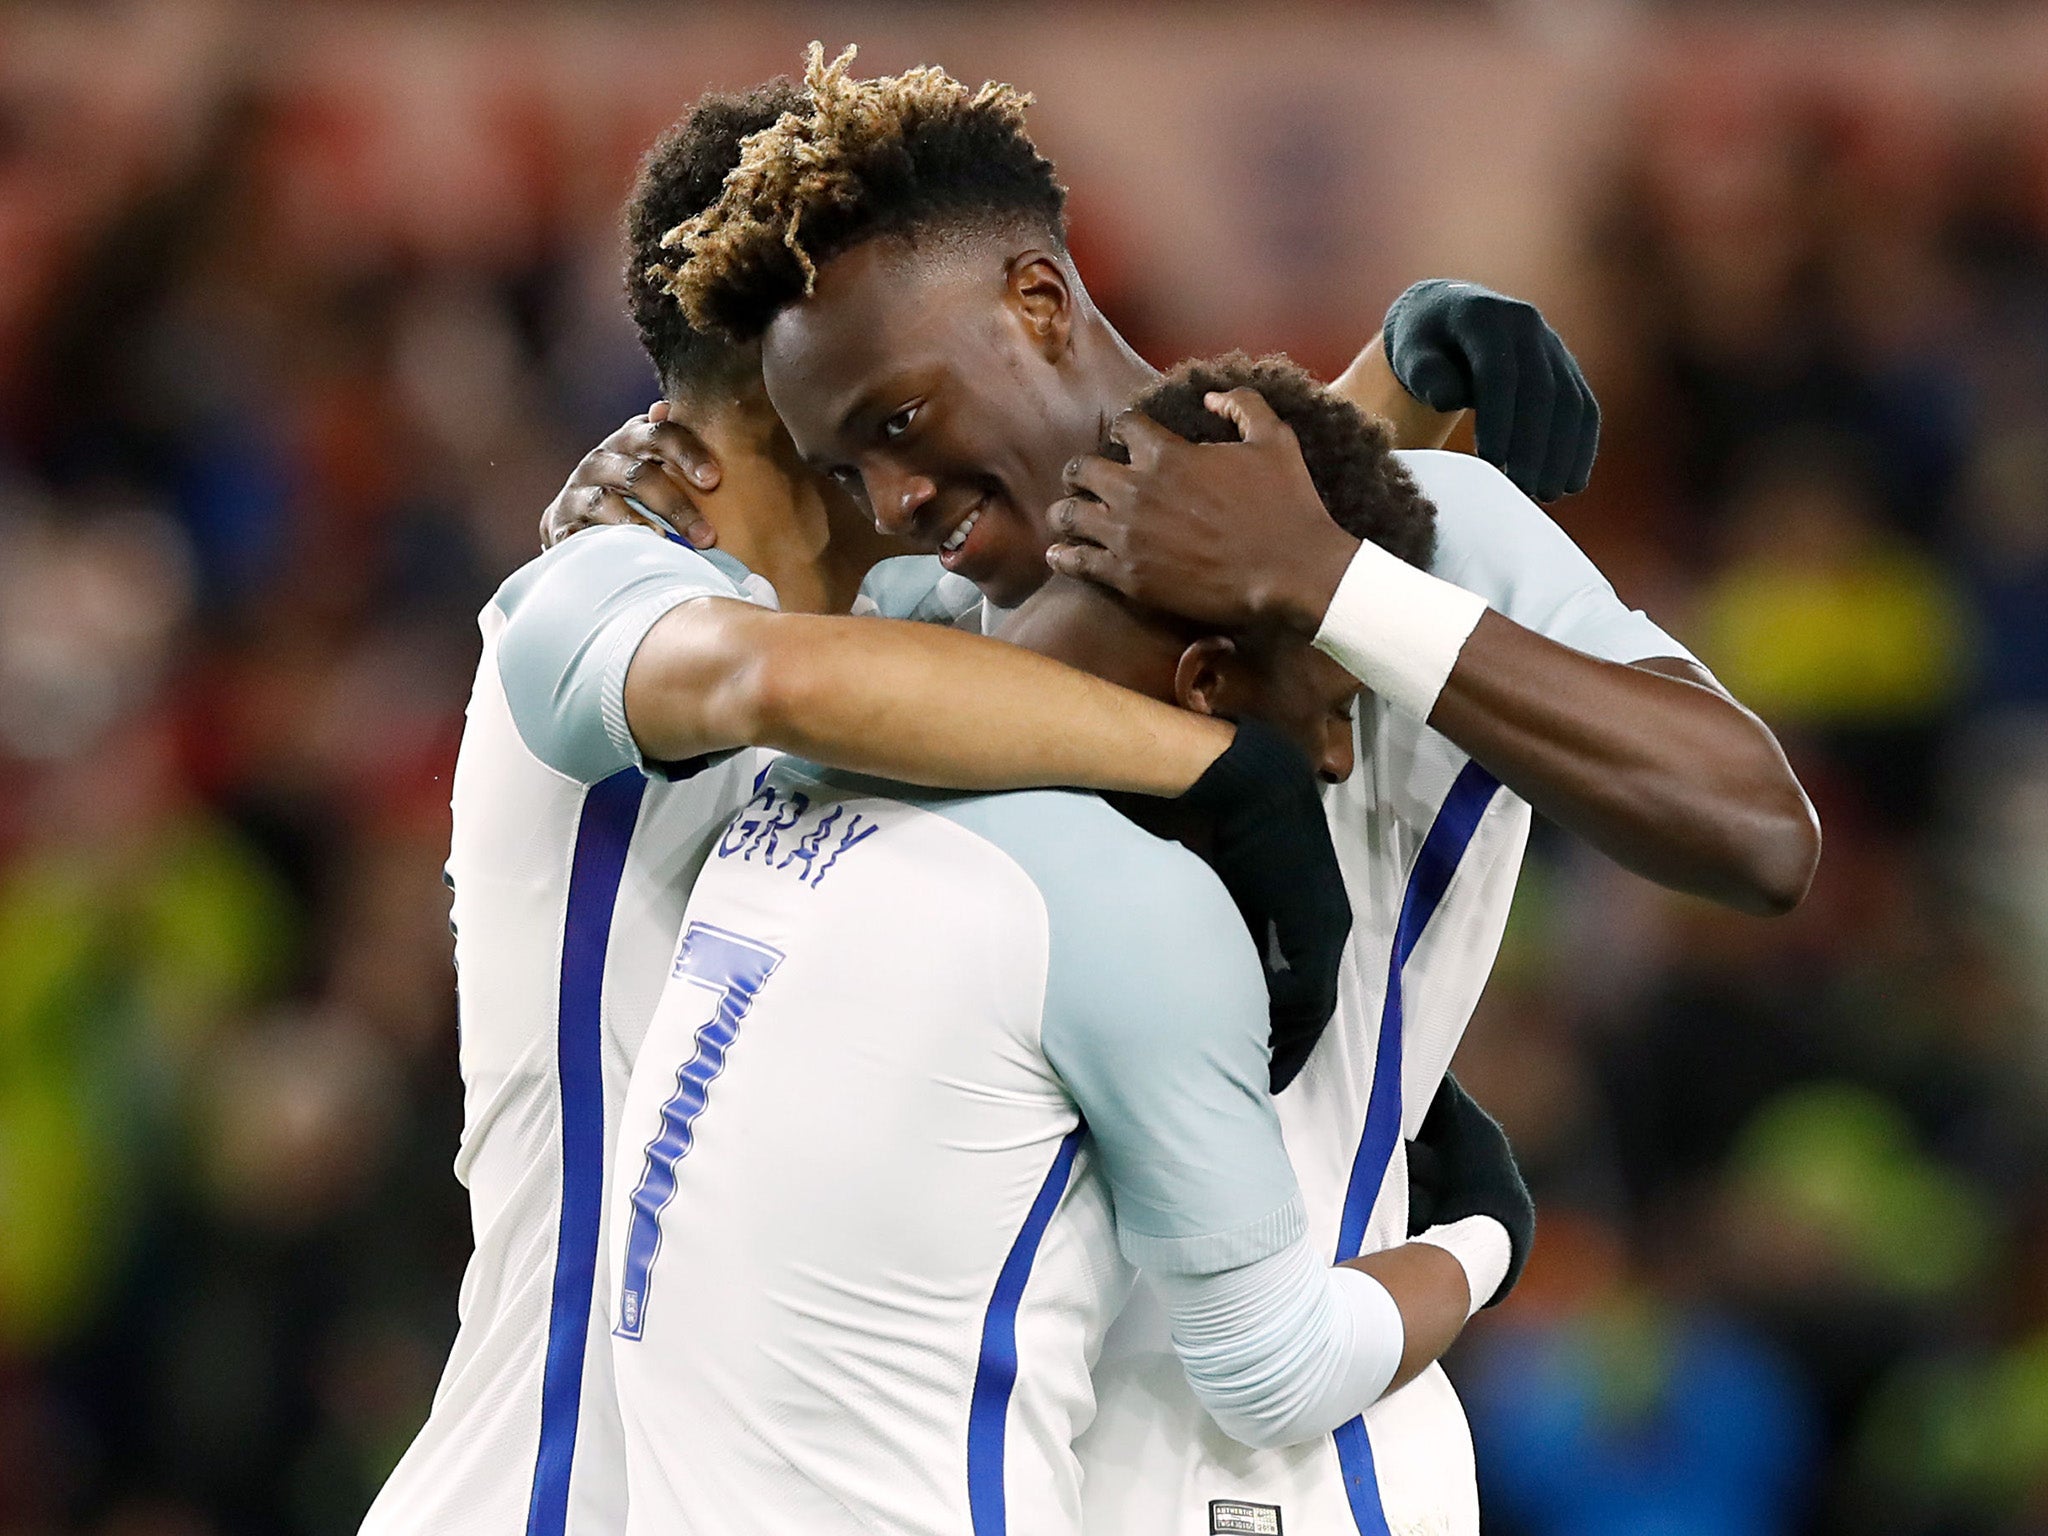 Tammy Abraham celebrates scoring his side's second goal of the game with team mates